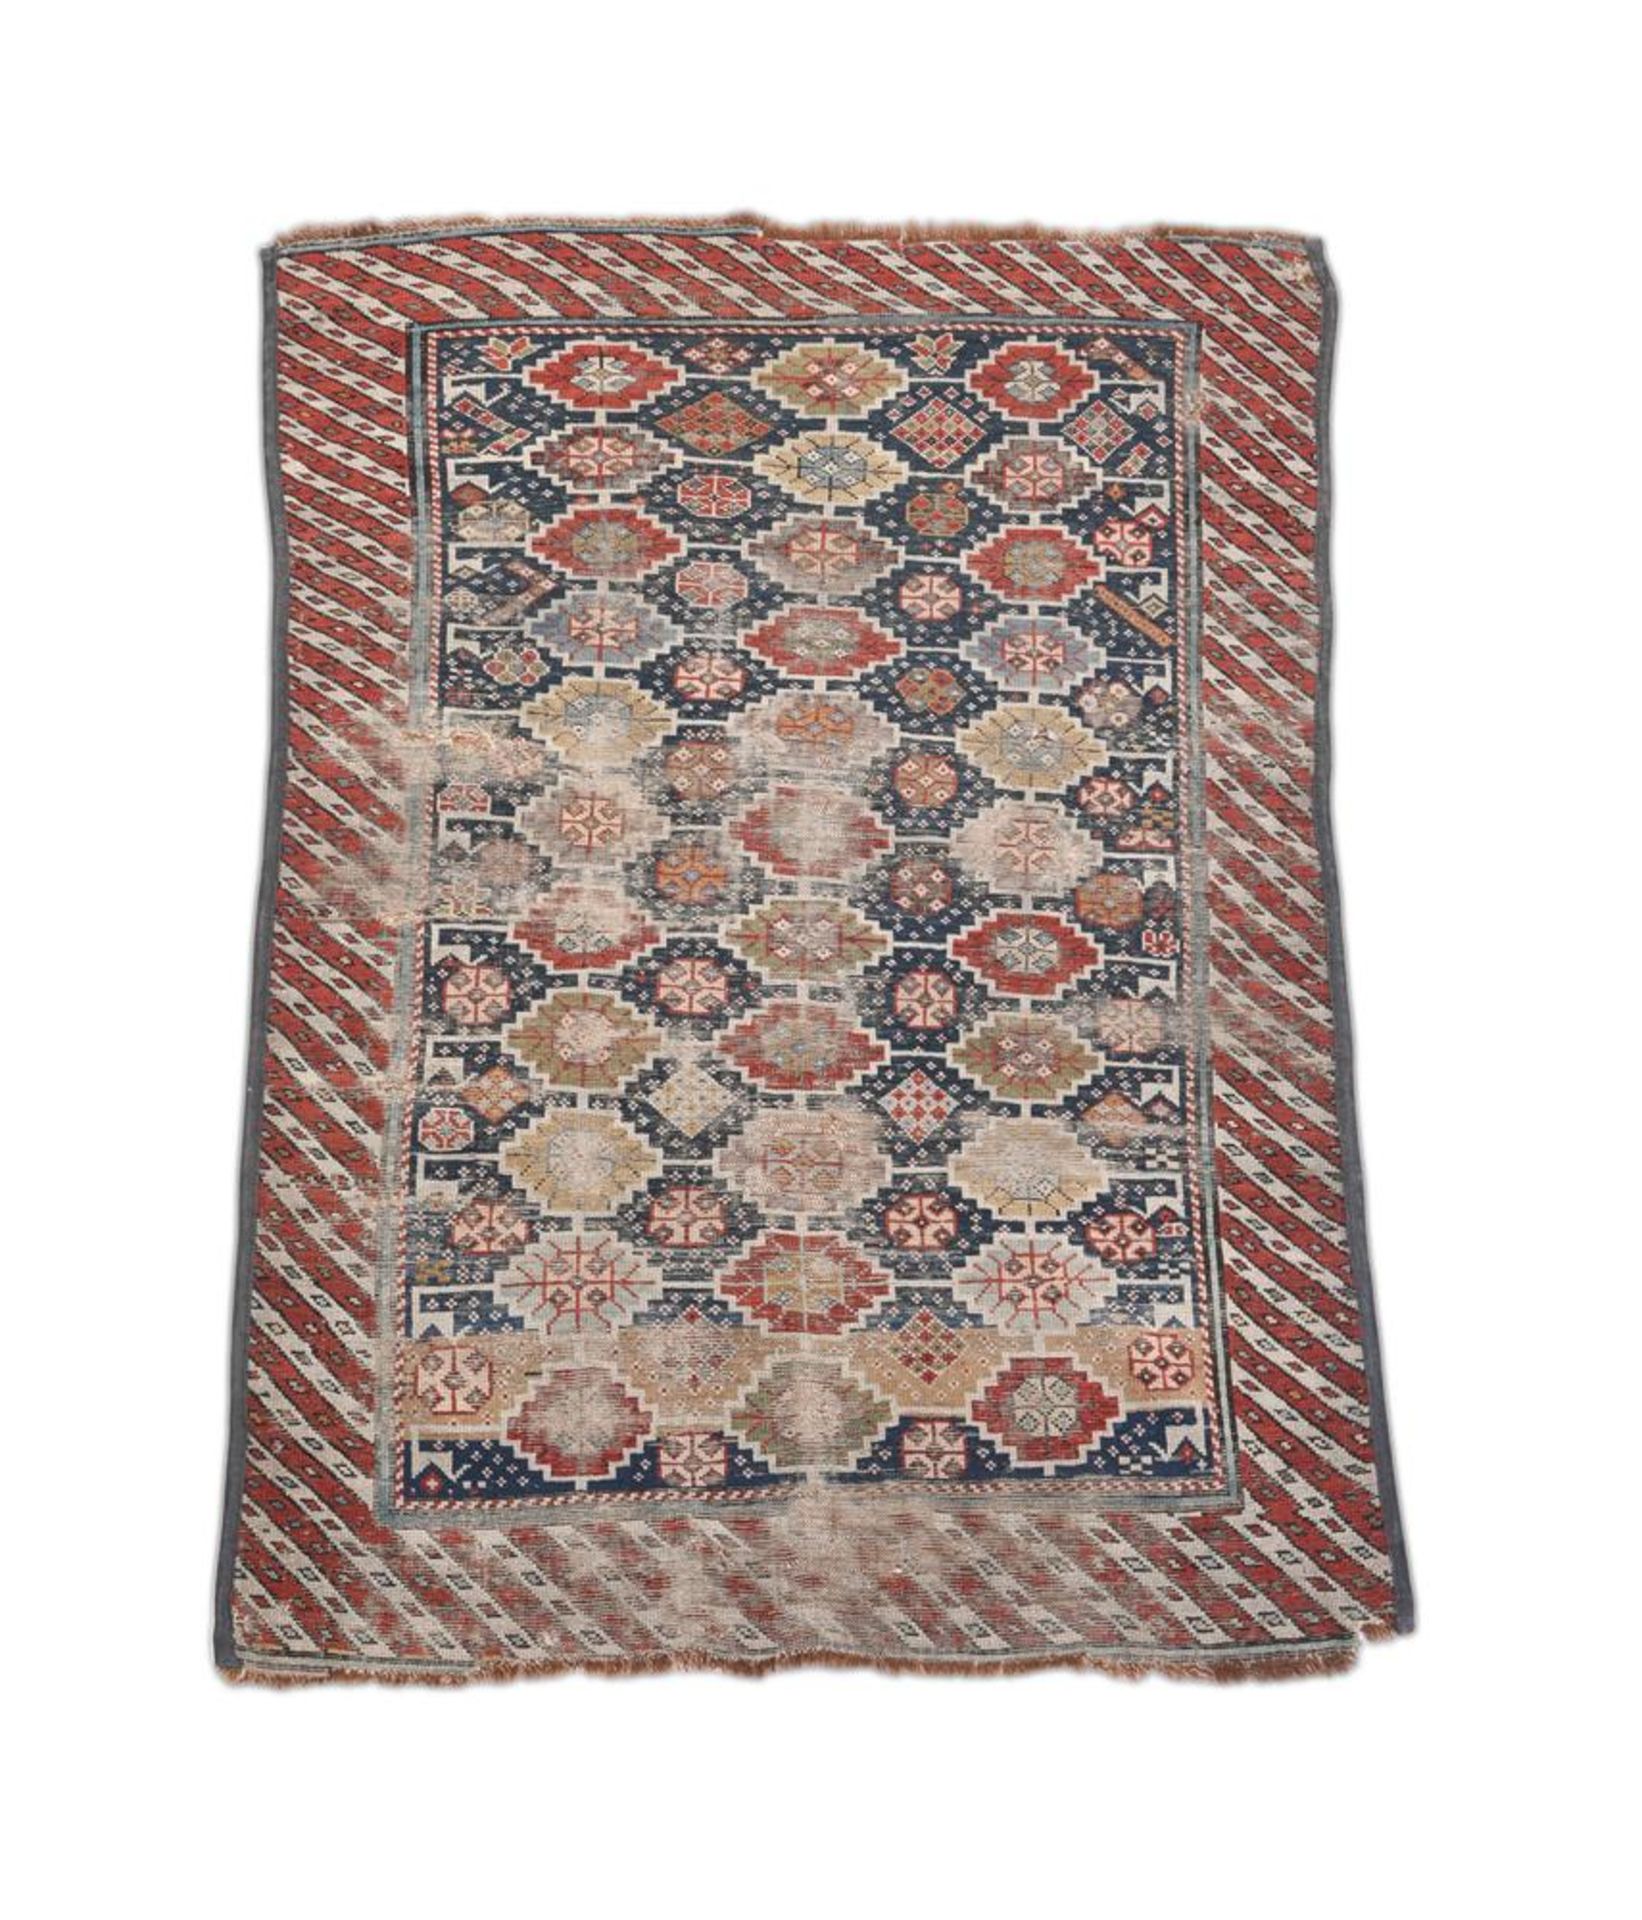 A CAUCASIAN RUG, POSSIBLY CHI CHI